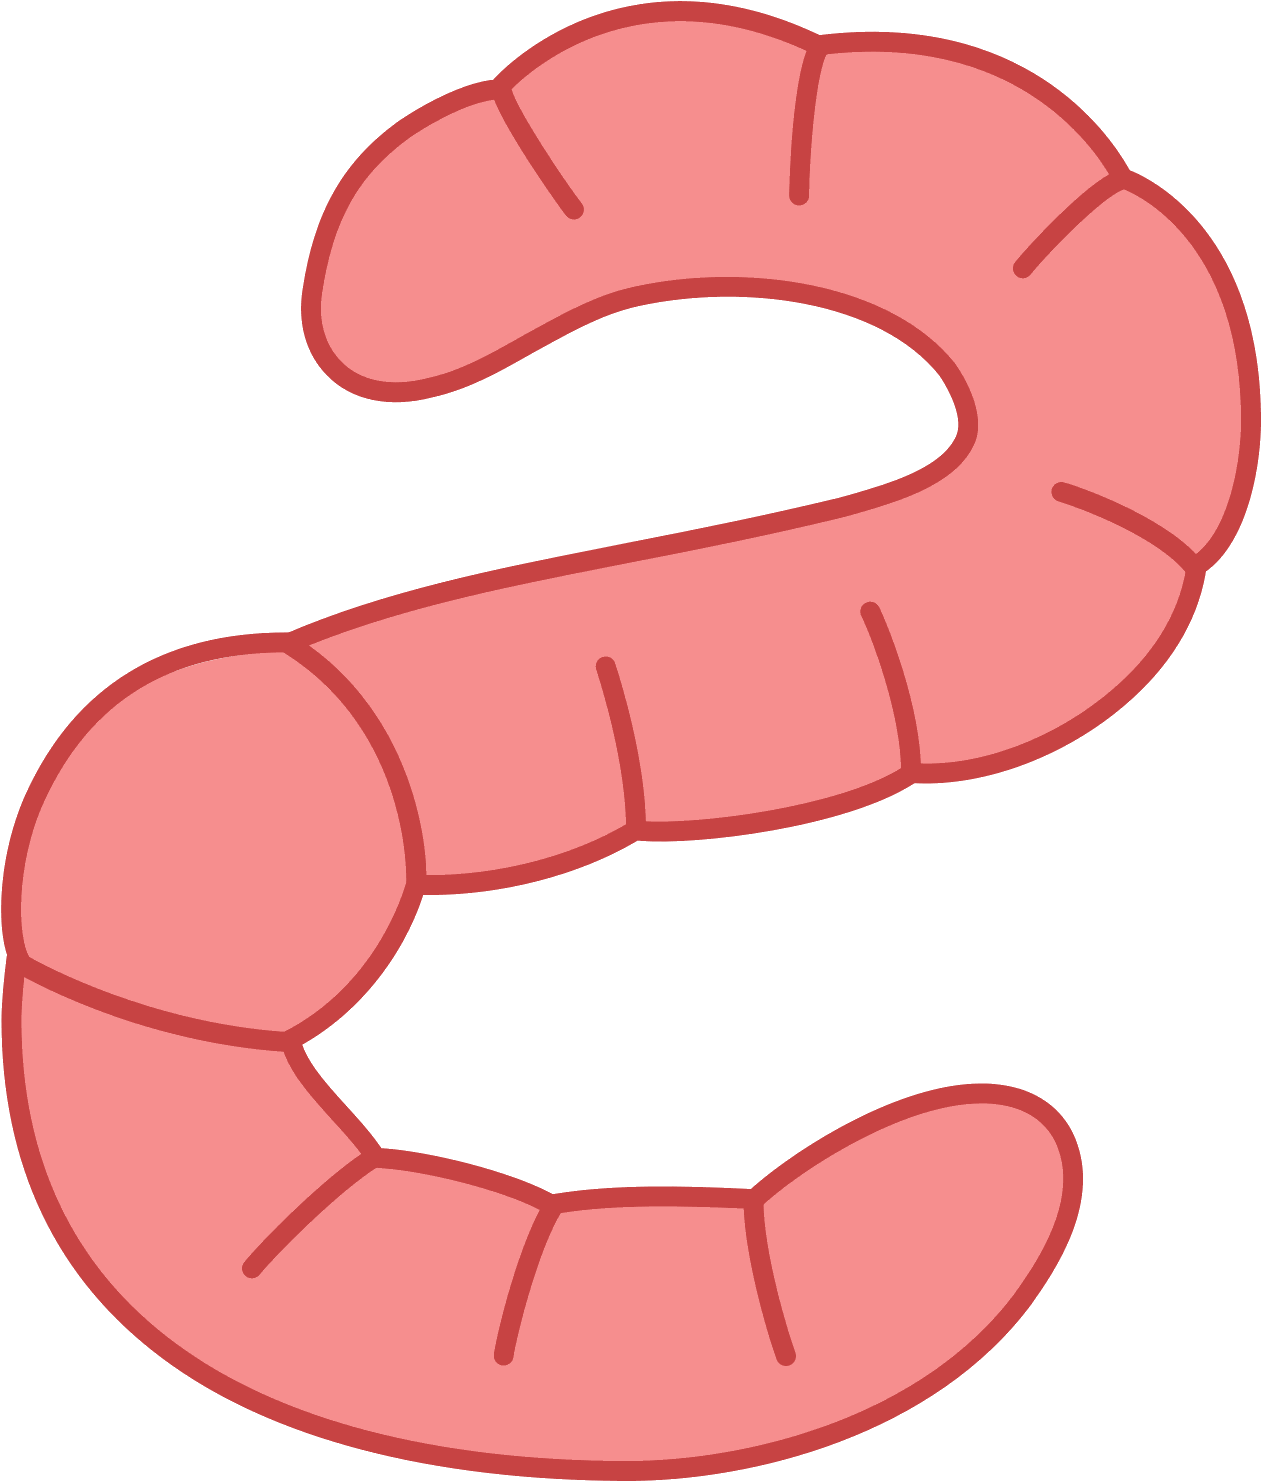 Earth Worm Icon - Vector Worm Png (1600x1600)